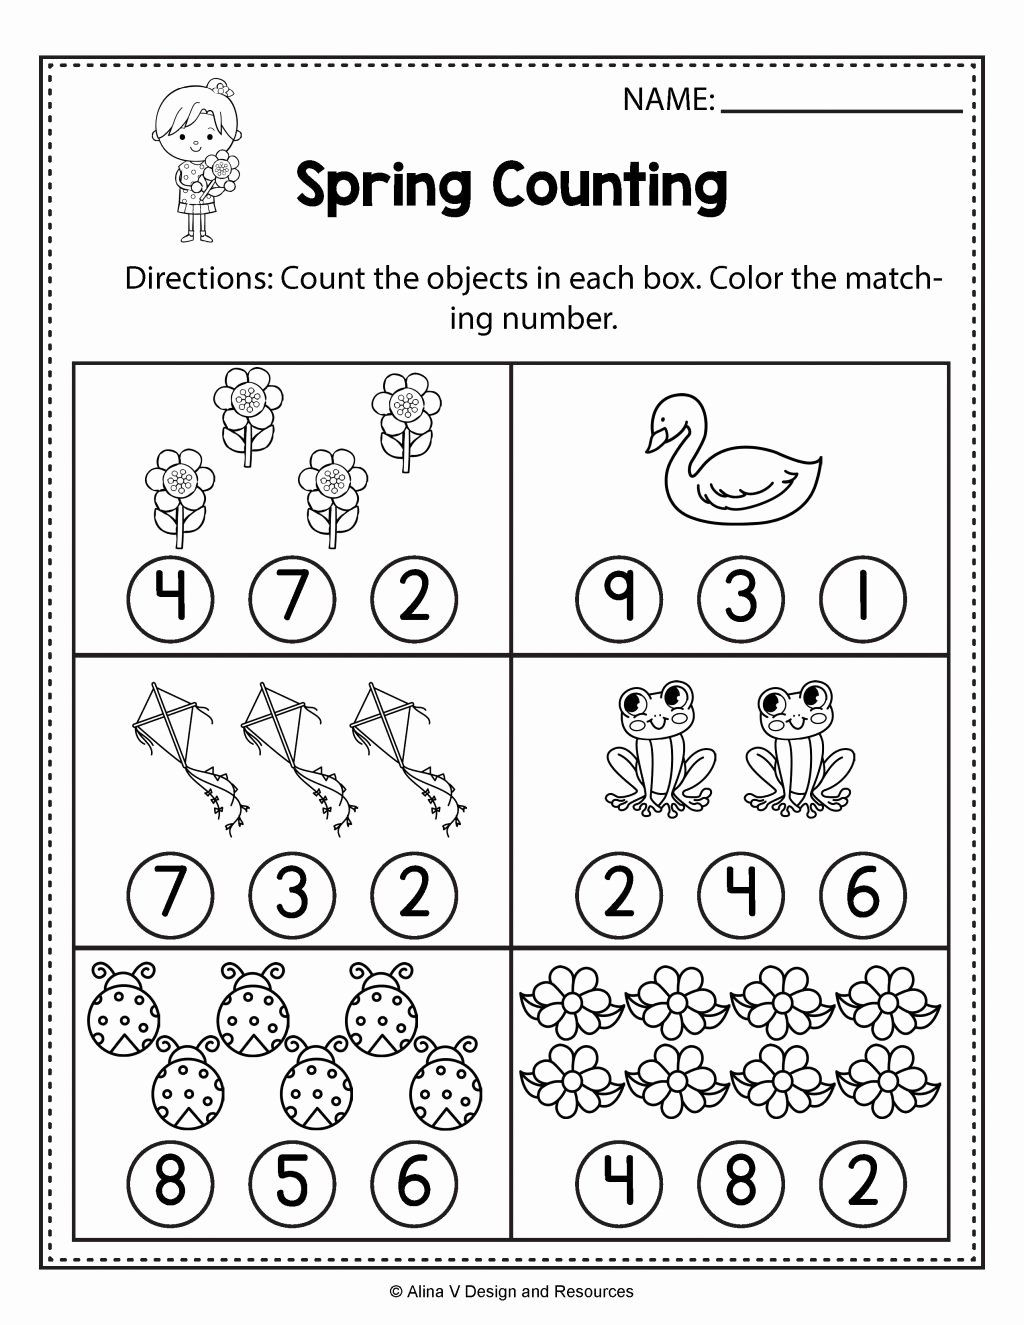 Coloring Spring Activities In 2020 | Spring Math